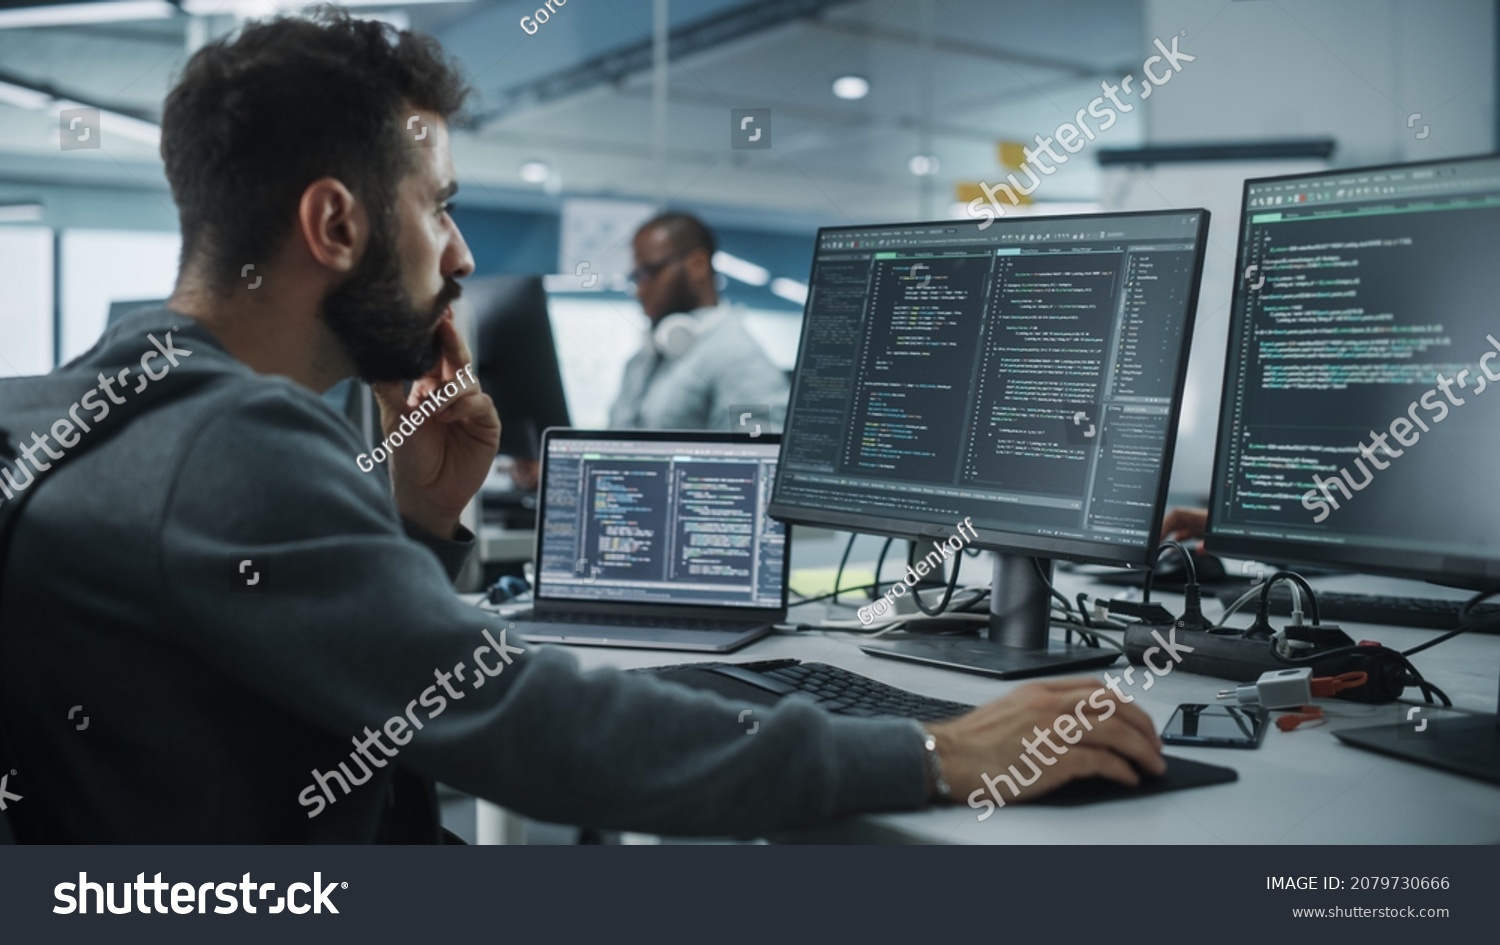 Diverse Office: Enthusiastic White IT Programmer Working on Desktop Computer. Male Specialist Creating Innovative Software. Engineer Developing App, Program, Video Game. Writing Code in Terminal #2079730666